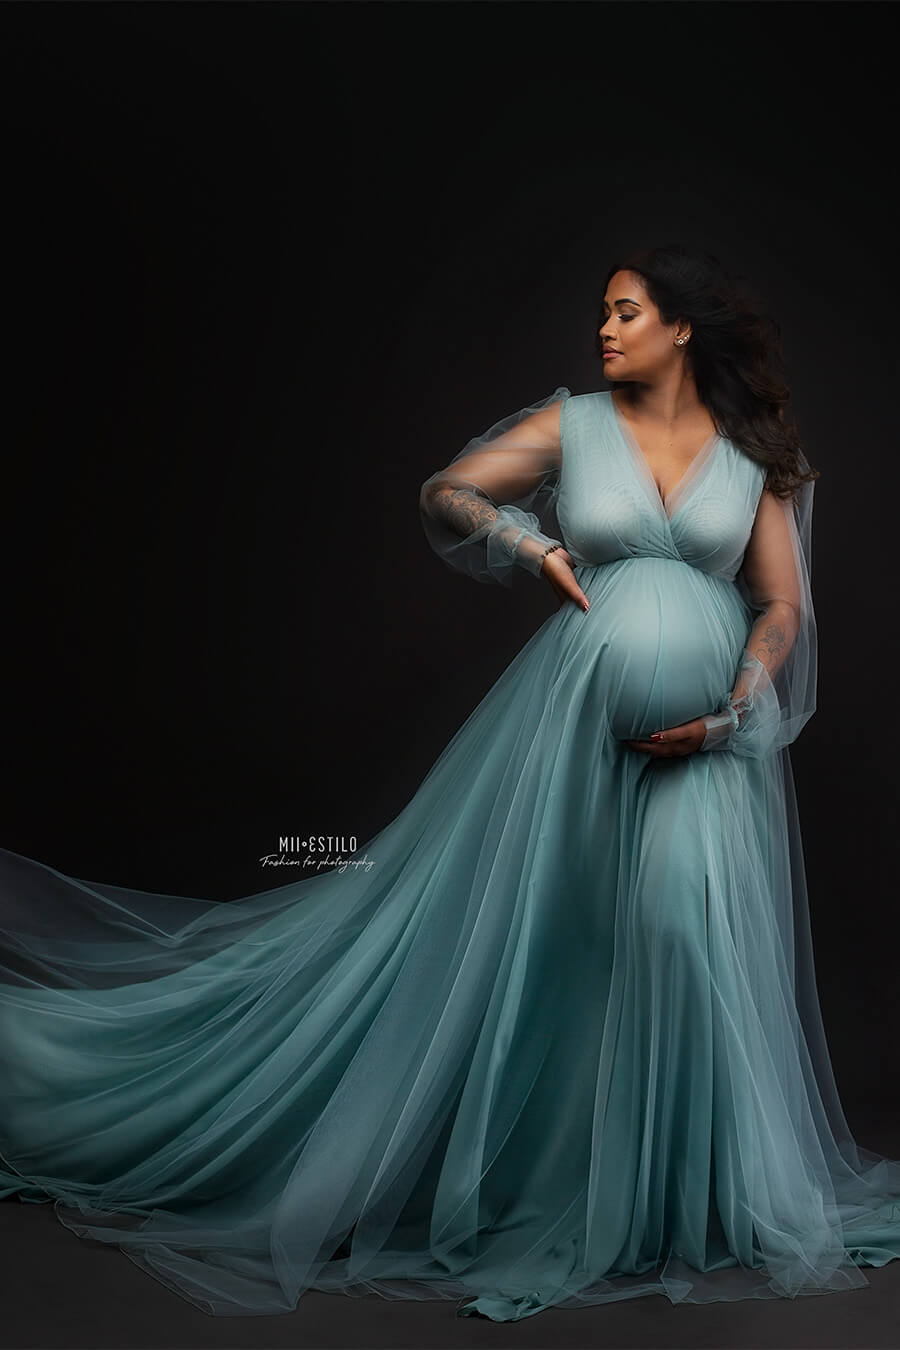 Nemi's London studio holds the largest selection of maternity photoshoot  dresses for your session. — London ​M​aternity, ​Pregnancy & London  ​N​ewborn Photography